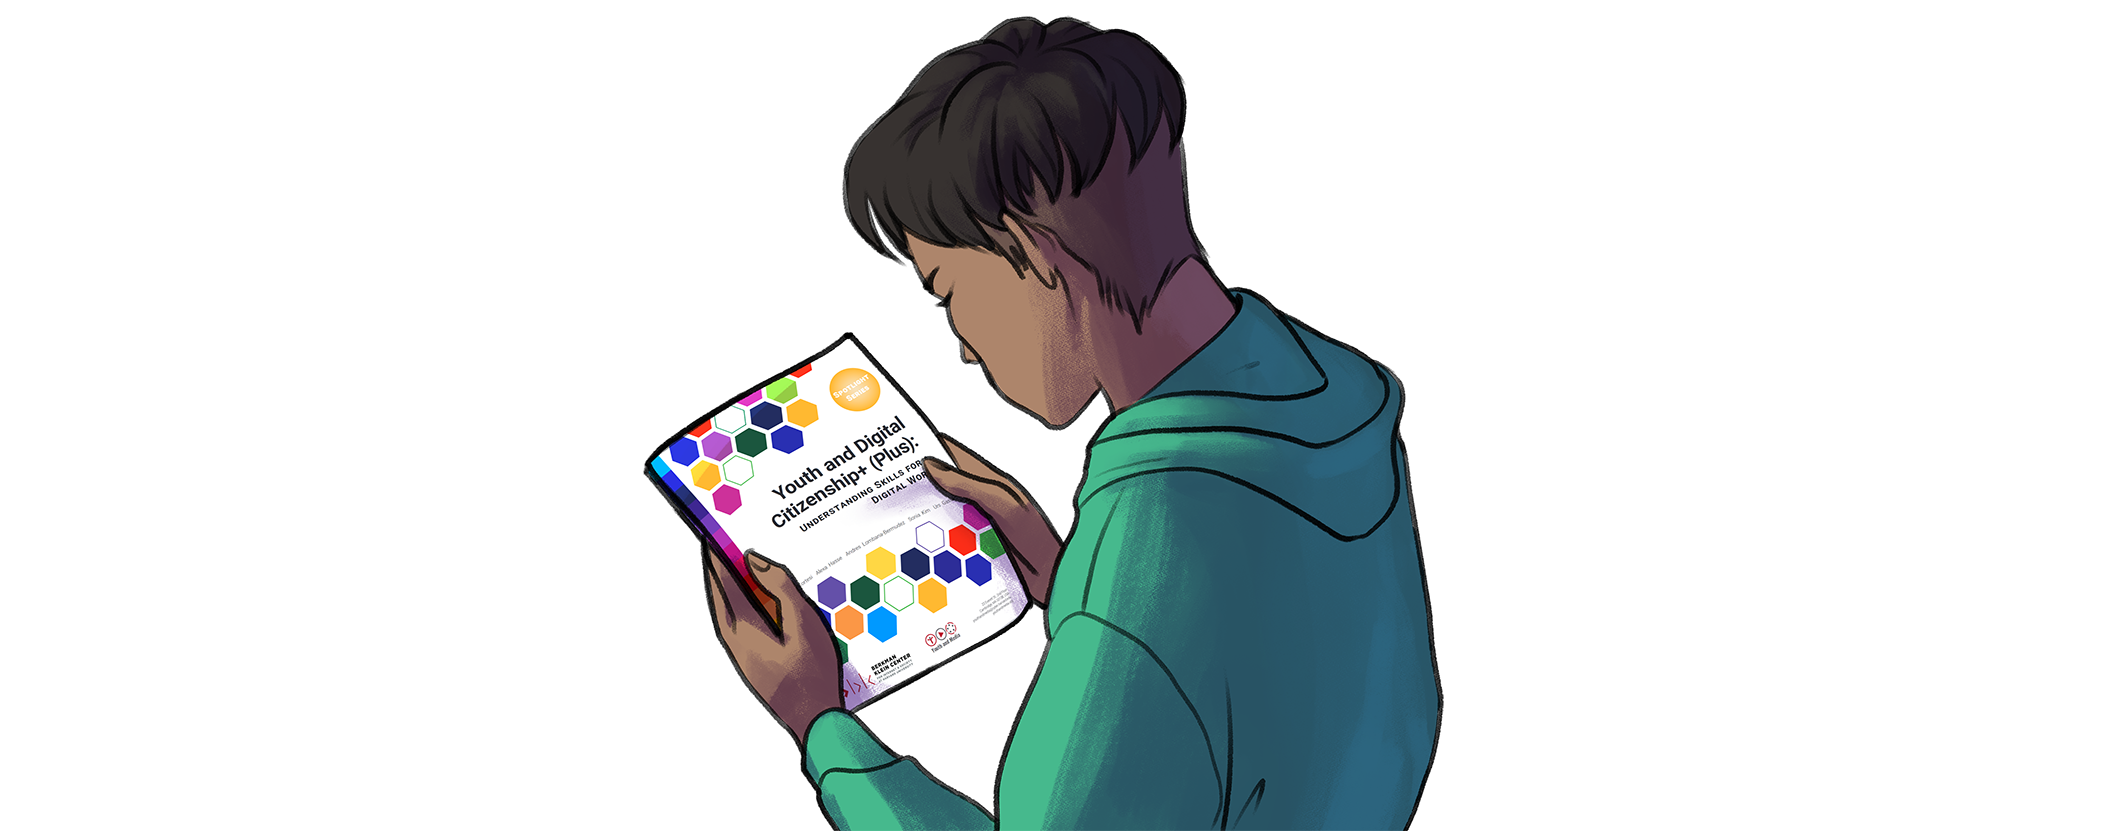 Illustration of a young person reading the digital citizenship report